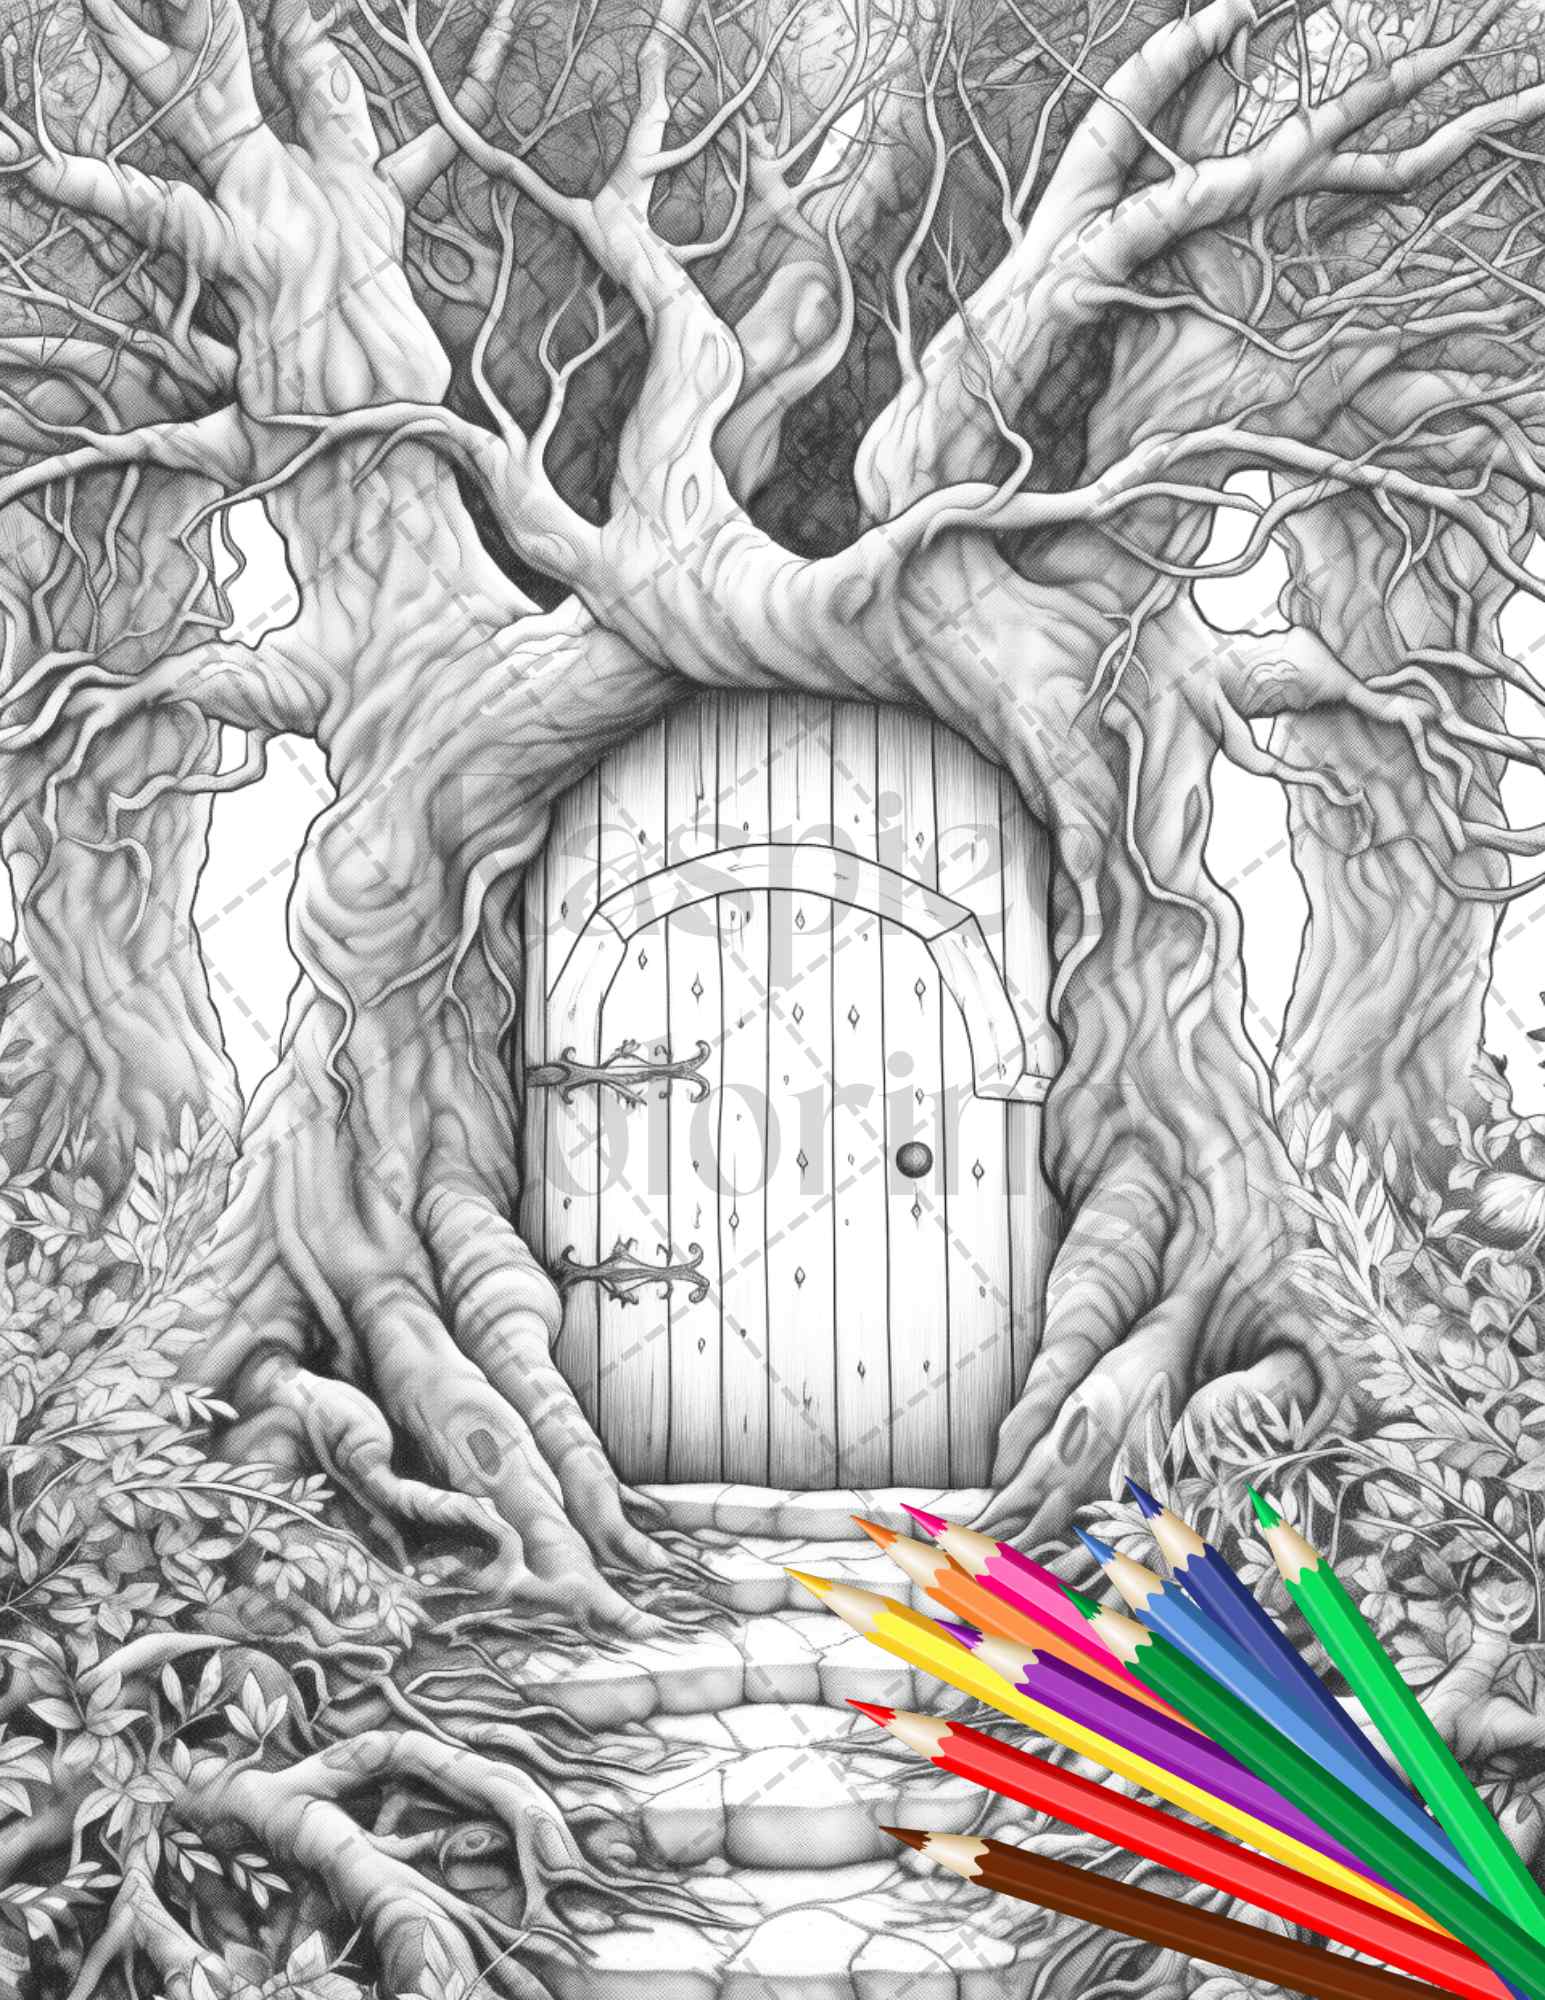 Magical Forest Gates Grayscale Coloring Pages, Printable Coloring Pages for Adults, Adult Coloring Book, Nature-themed Grayscale Art, Detailed and Intricate Coloring Designs